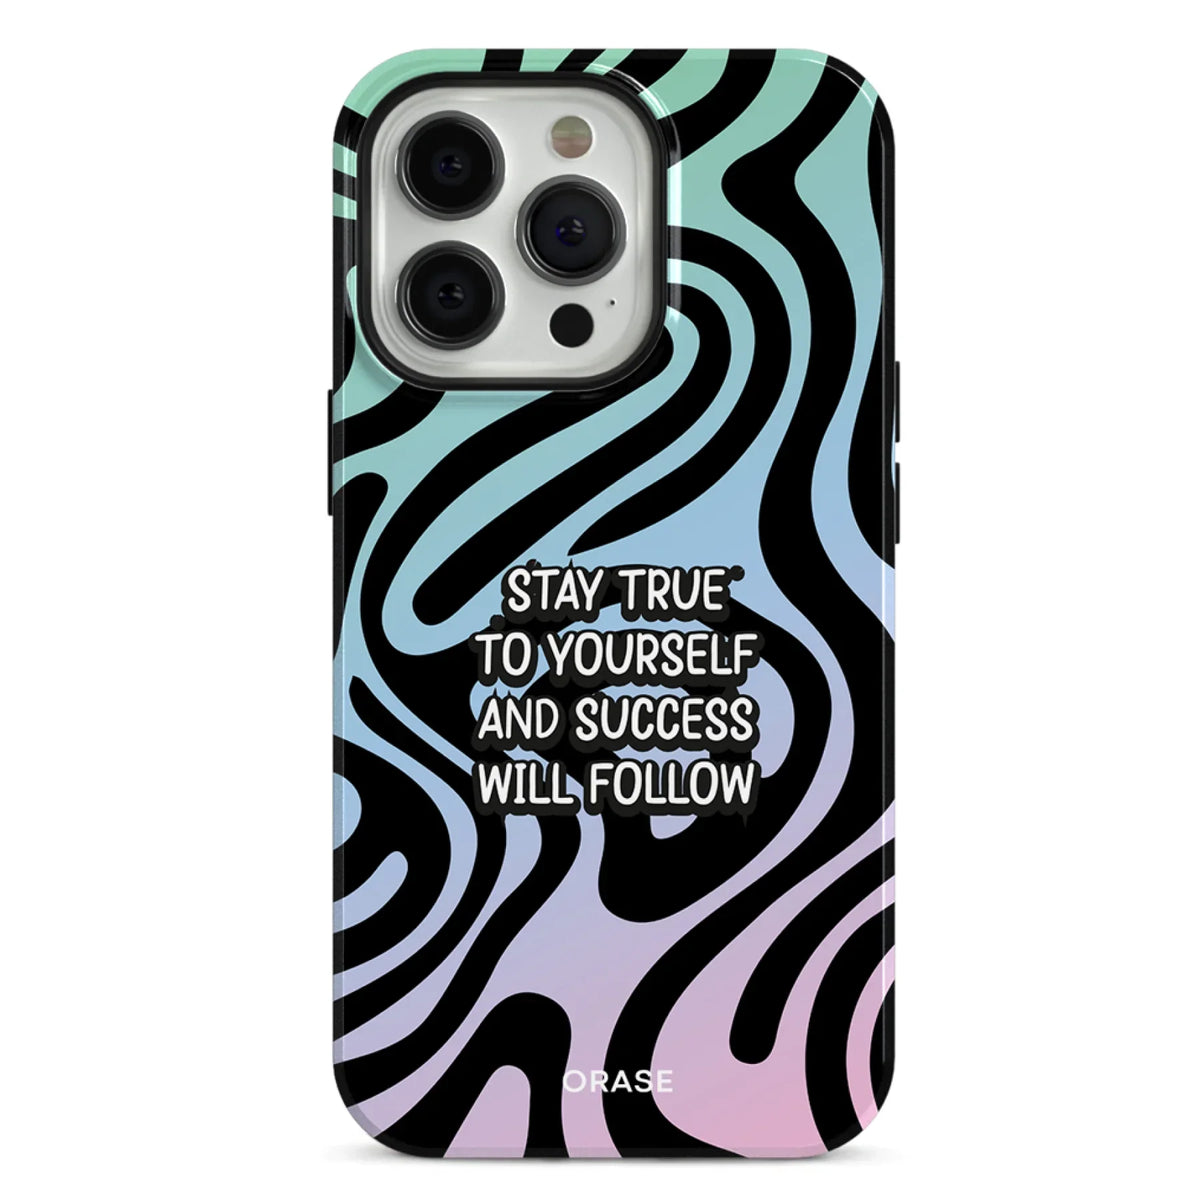 Stay True to Yourself iPhone Case - iPhone 12 Mini